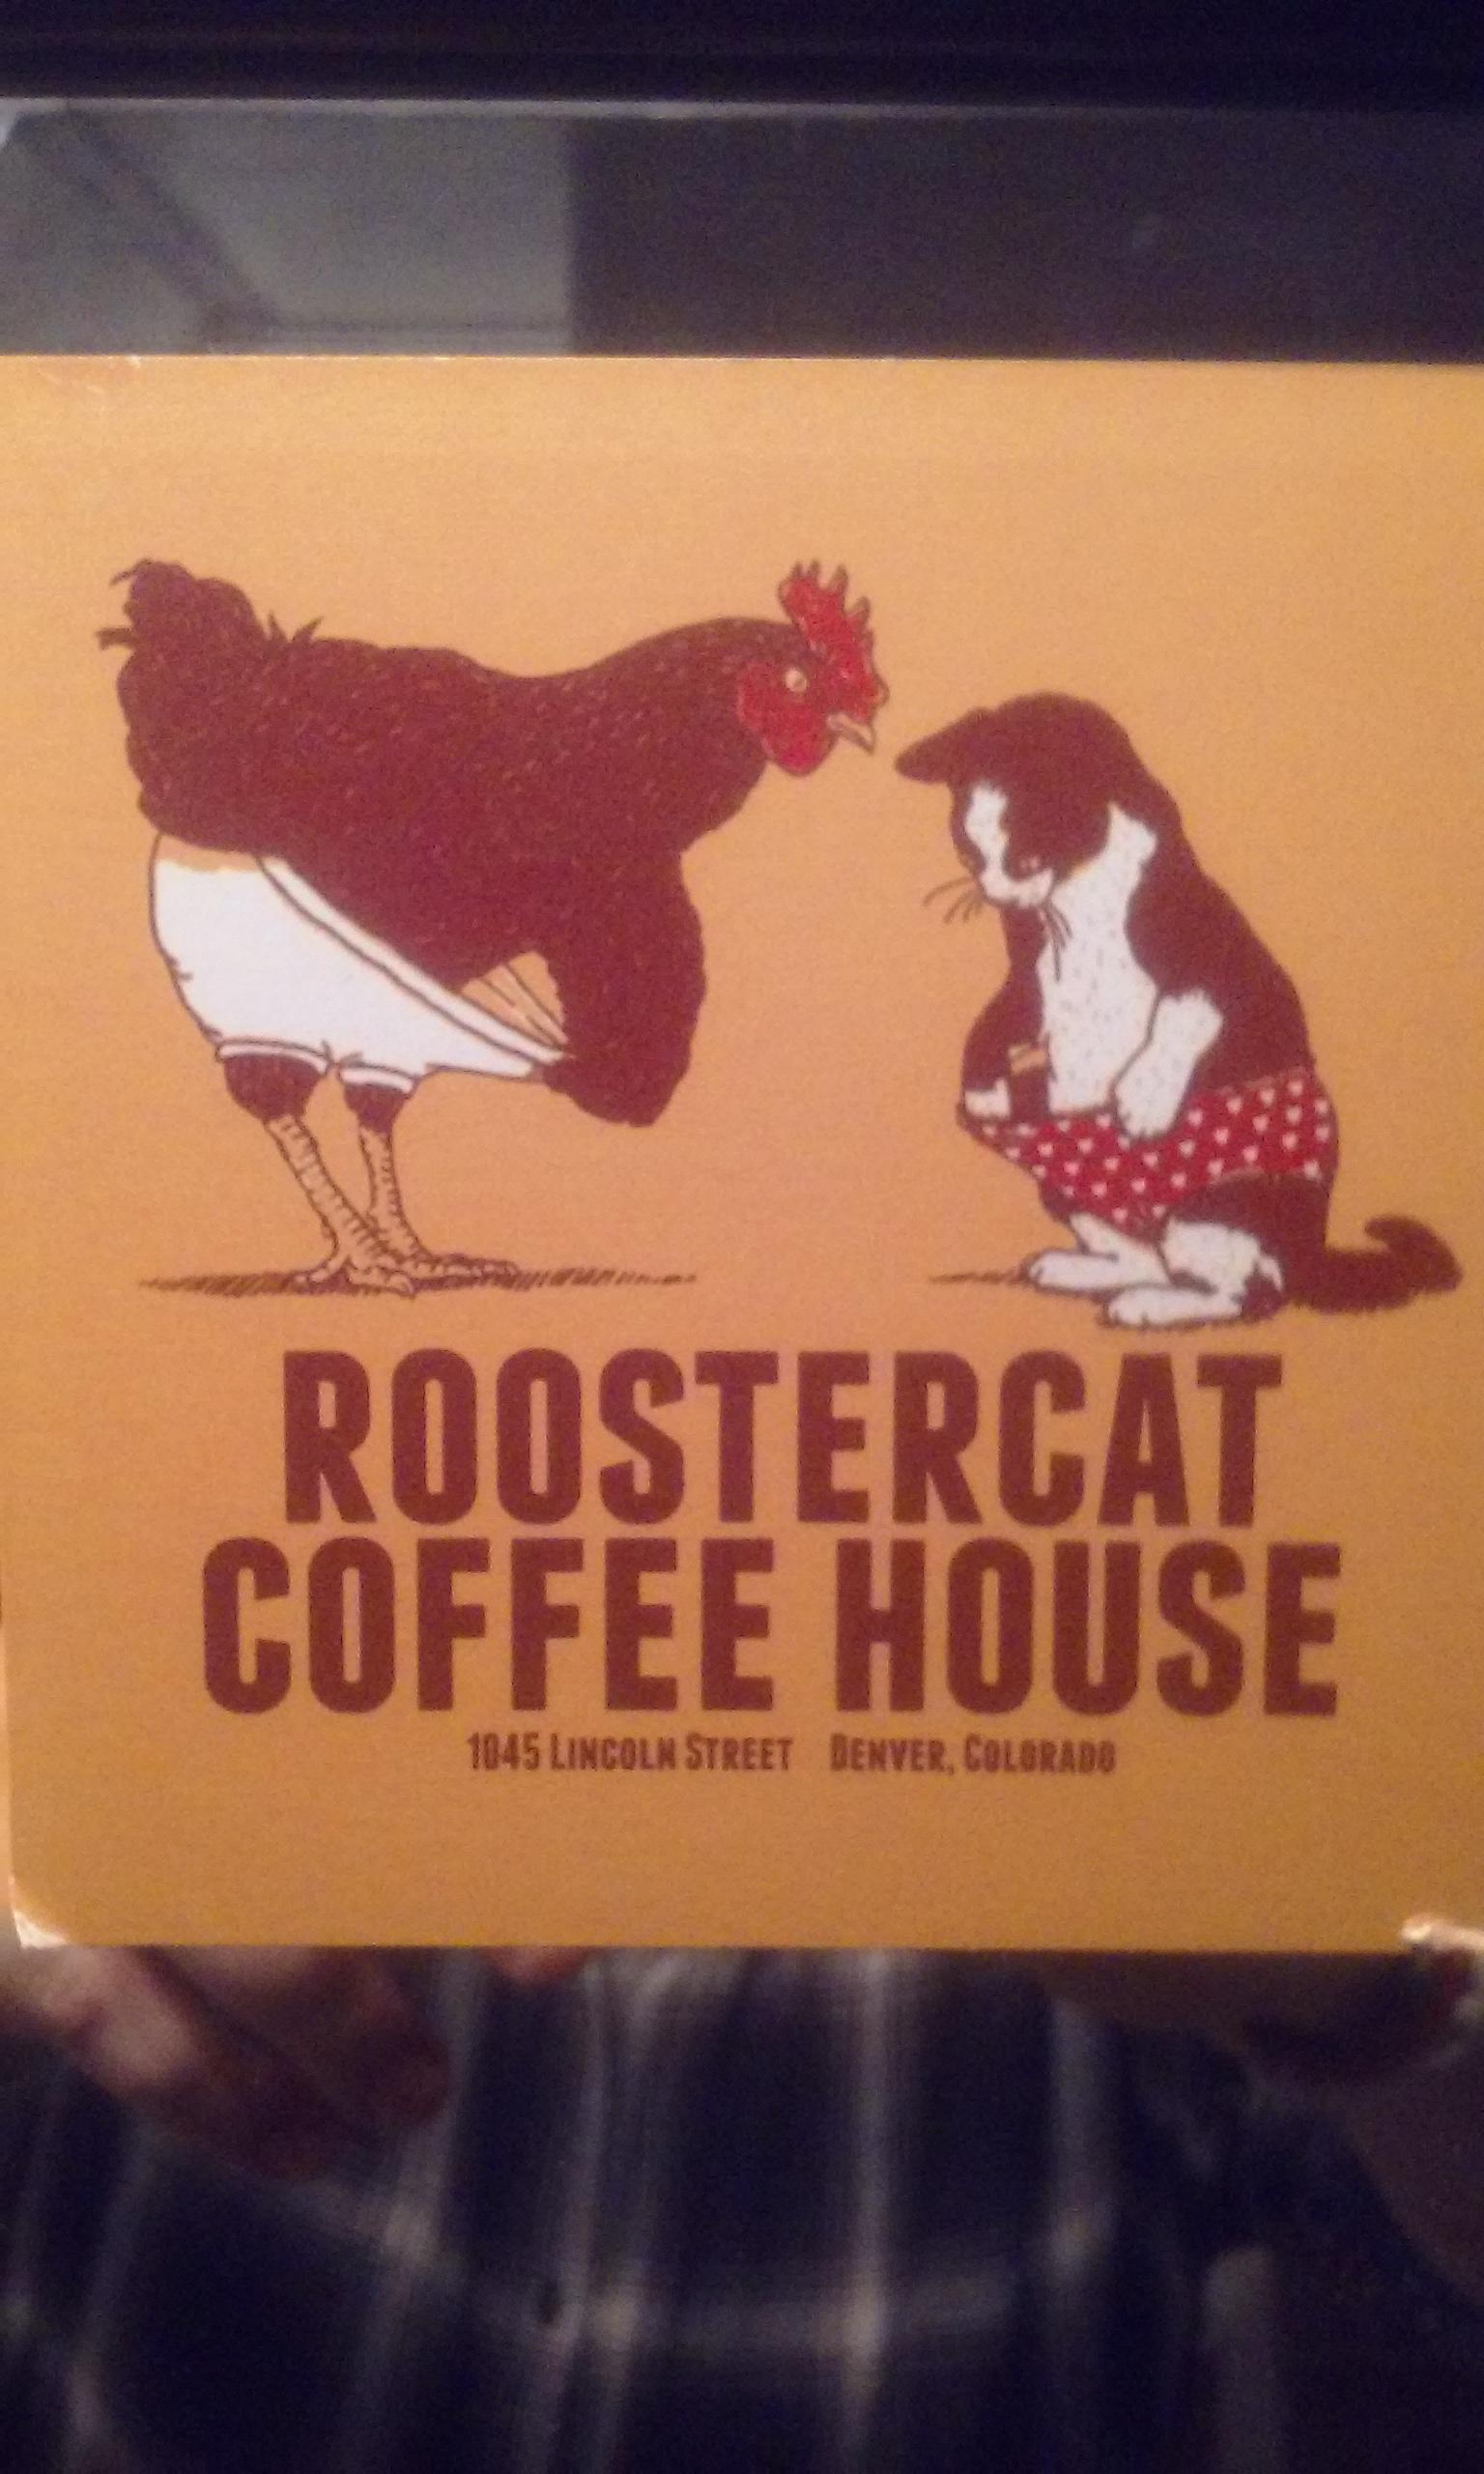 poster - Roostercat Coffee House 1045 Lincoln Street Benver, Colorado